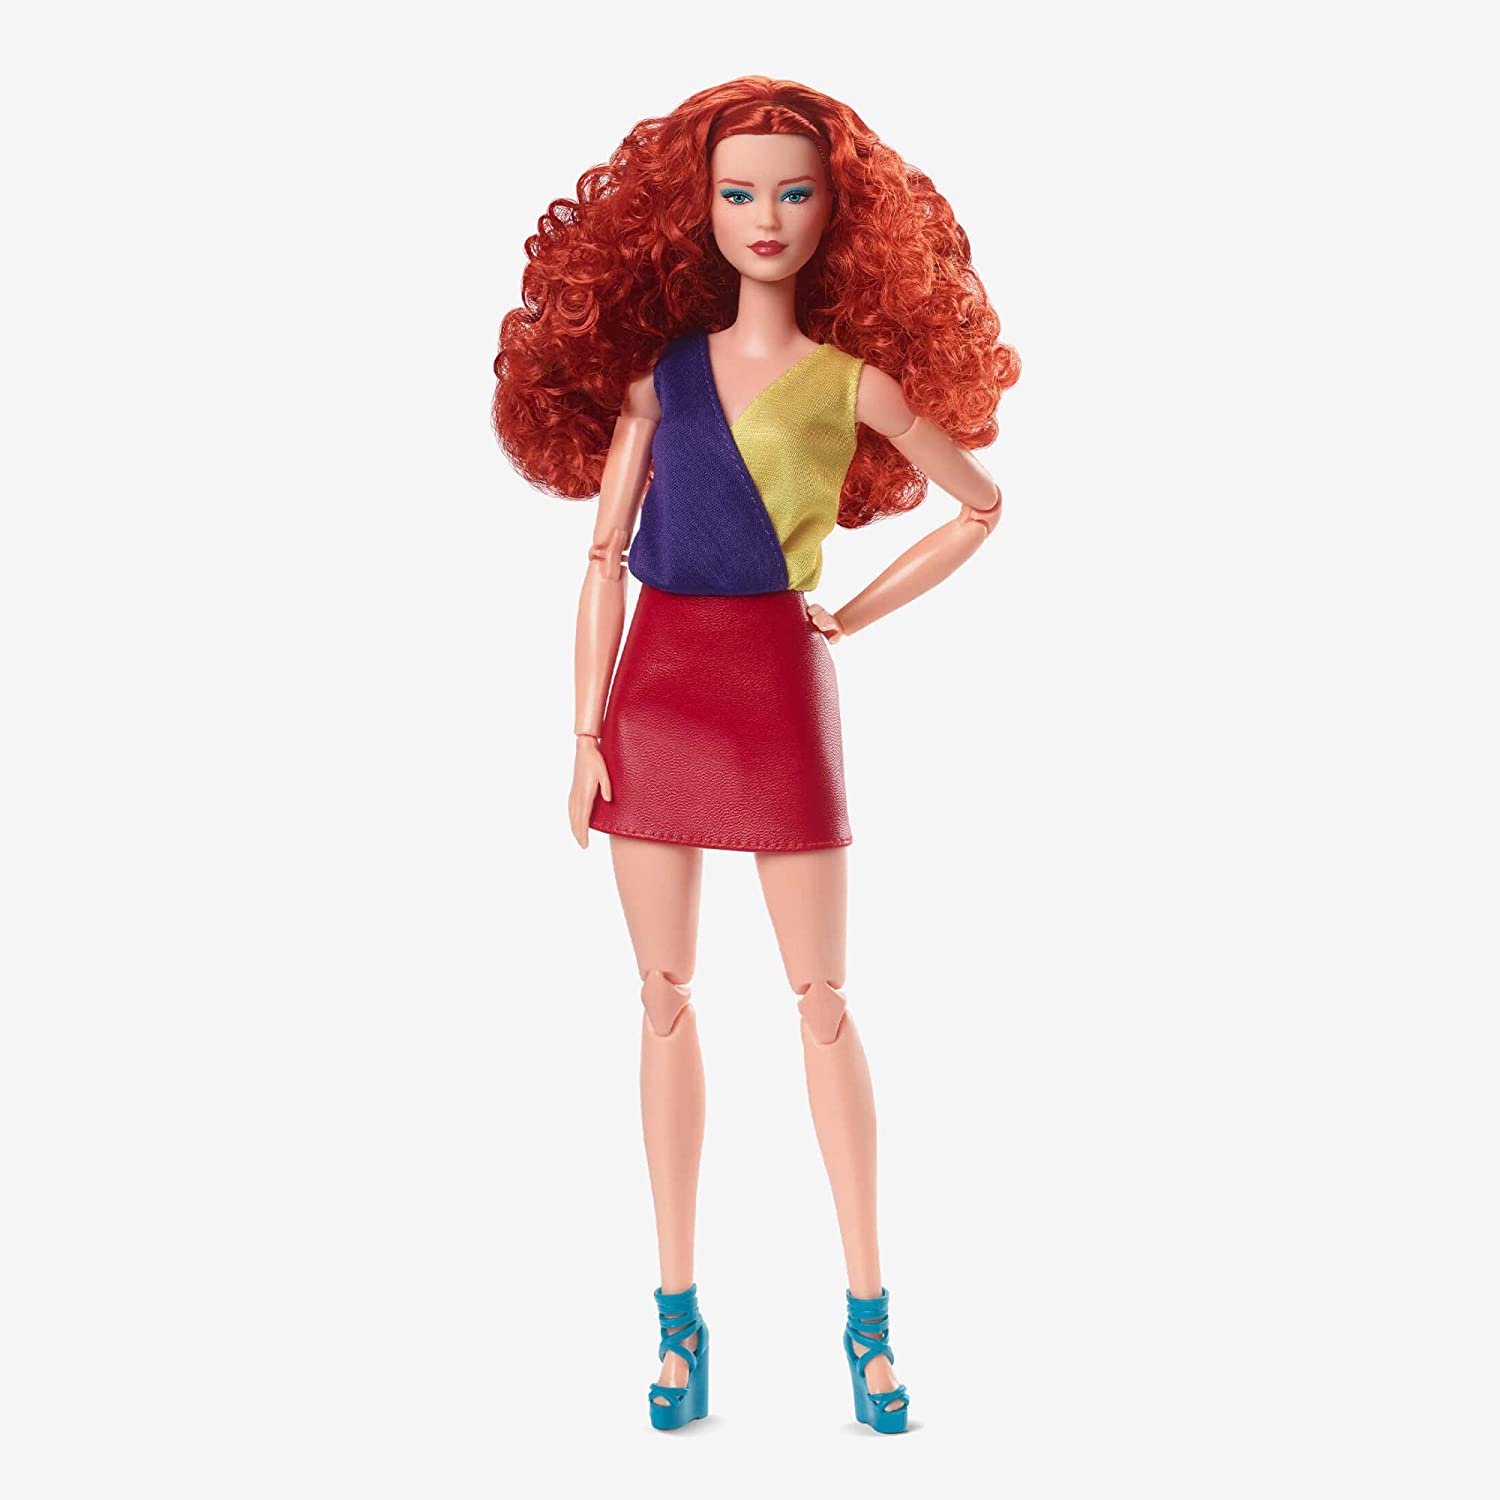 New upcoming Barbie Dolls